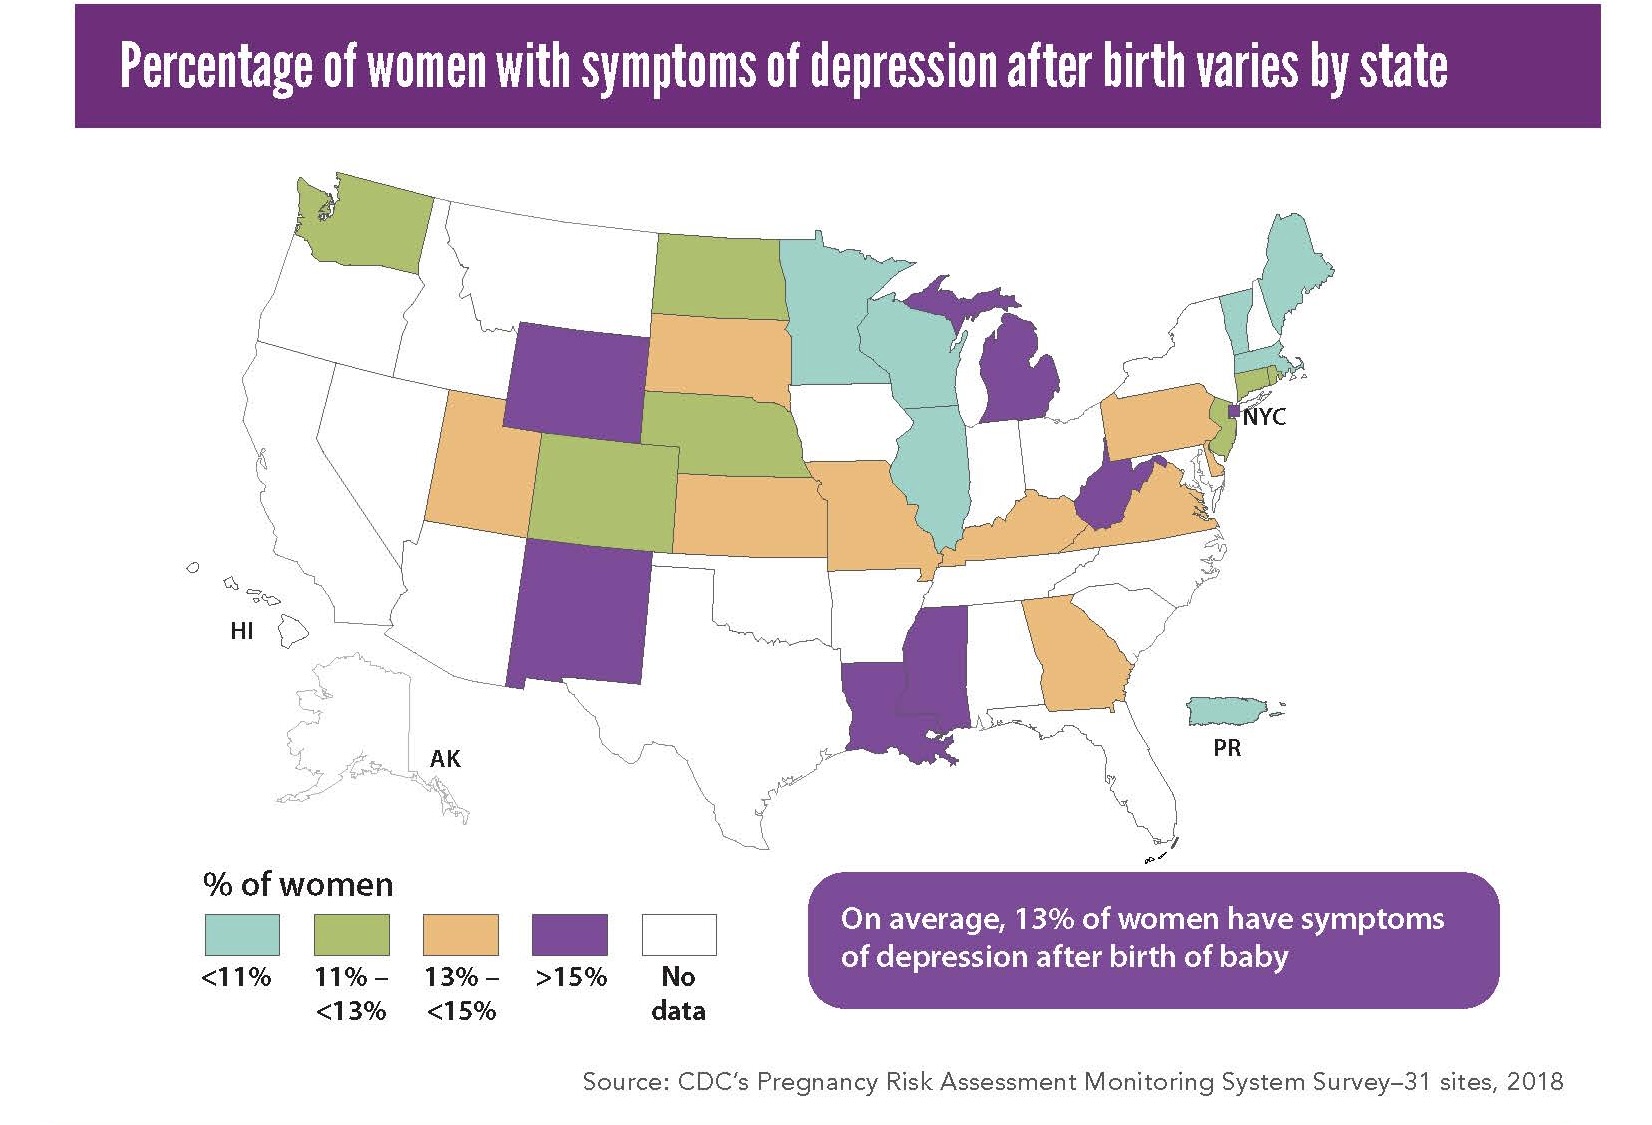 Centers for Disease Control and Prevention chart showing rates of women with depression after birth by state